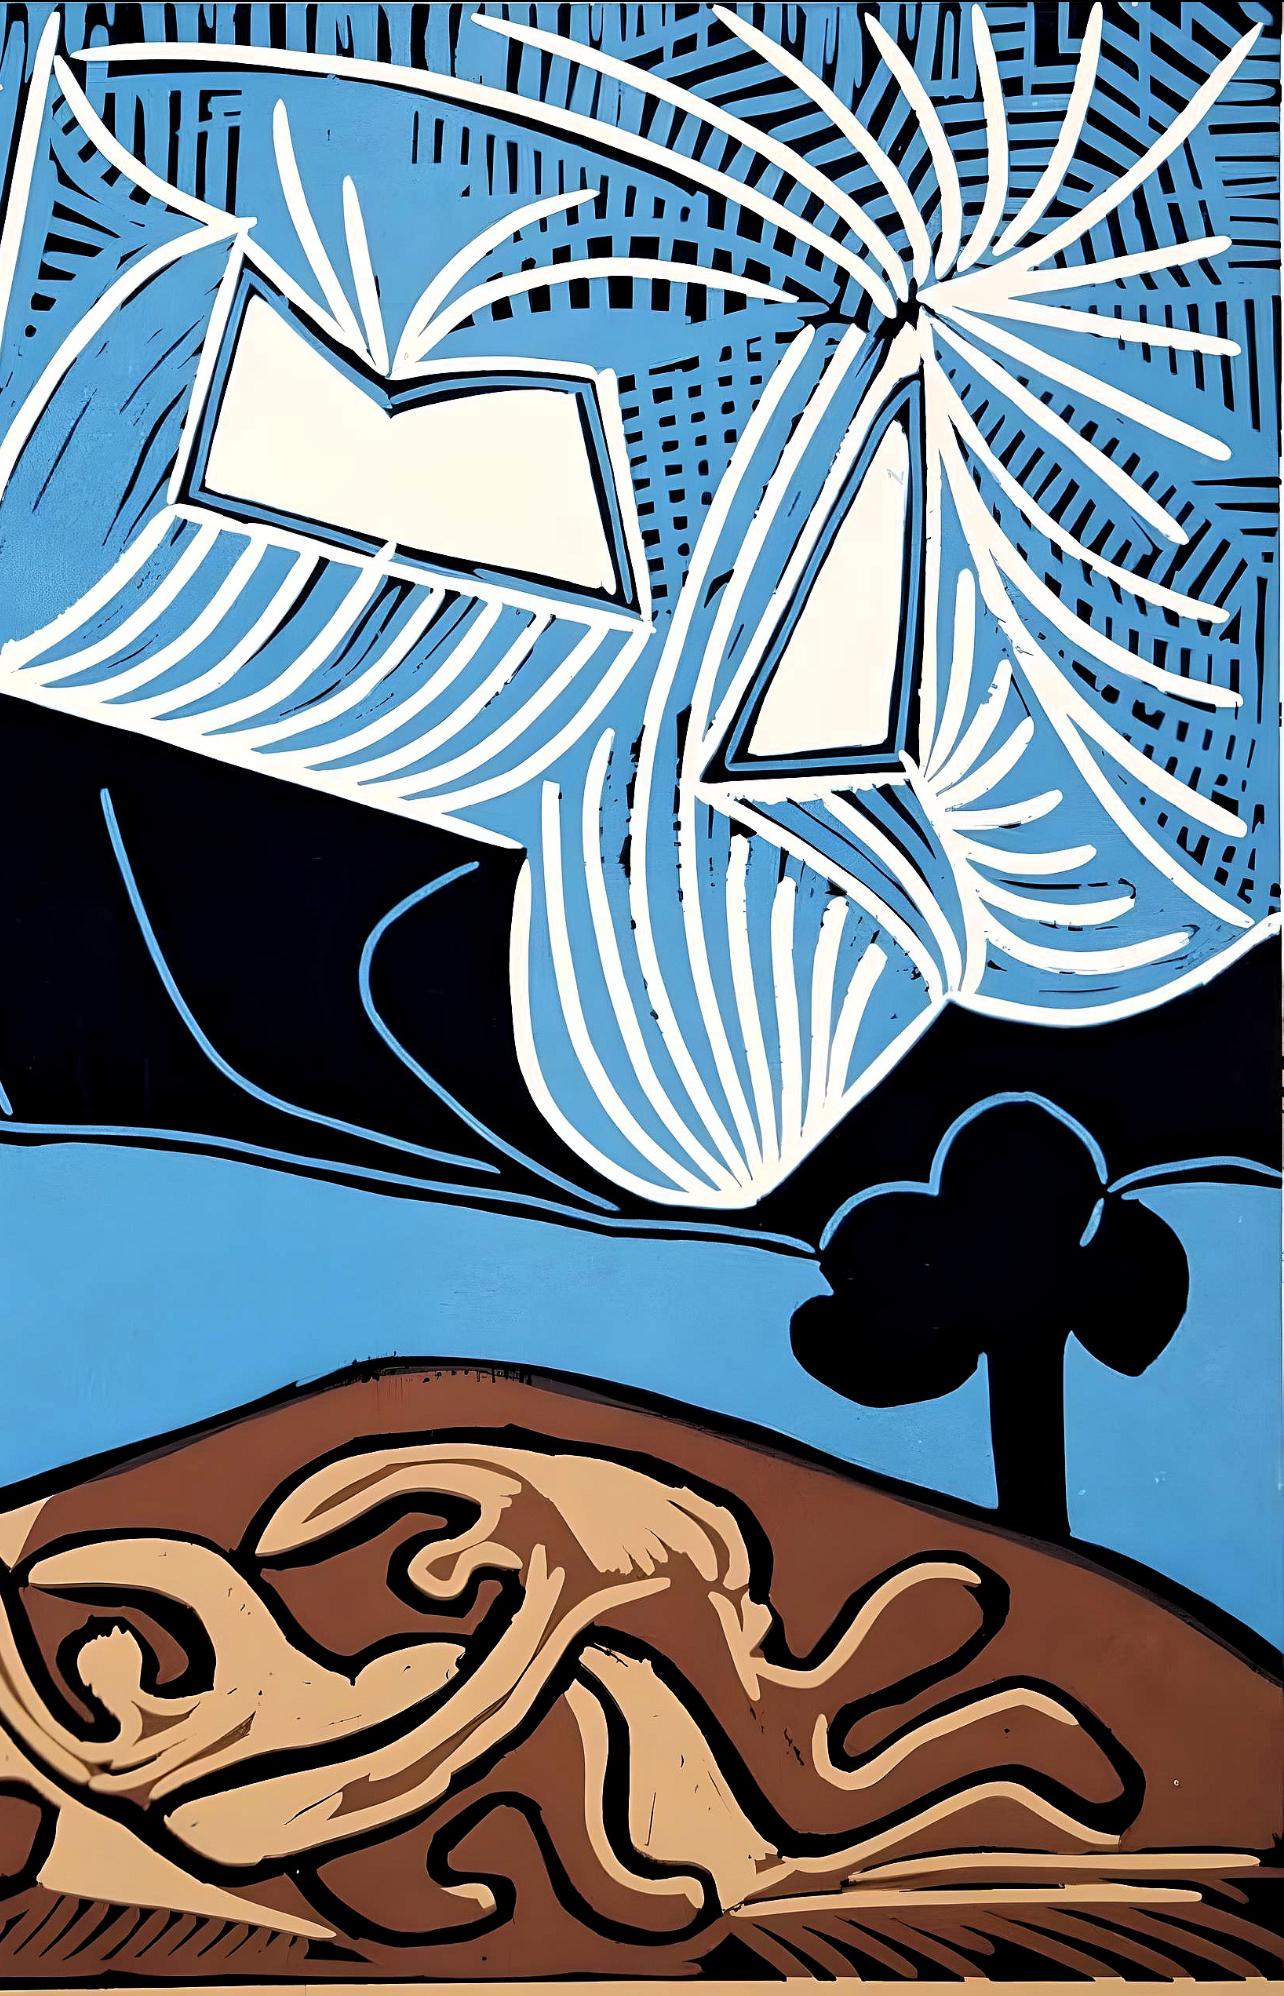 Linocut on wove paper. Inscription: Unsigned and unnumbered, as issued. Good condition; unframed. Notes: From the volume, Pablo Picasso: Linogravures. Published by Éditions Cercle d'Art, Paris; printed by Verlag Gerd Hatje, Stuttgart 1962.

PABLO